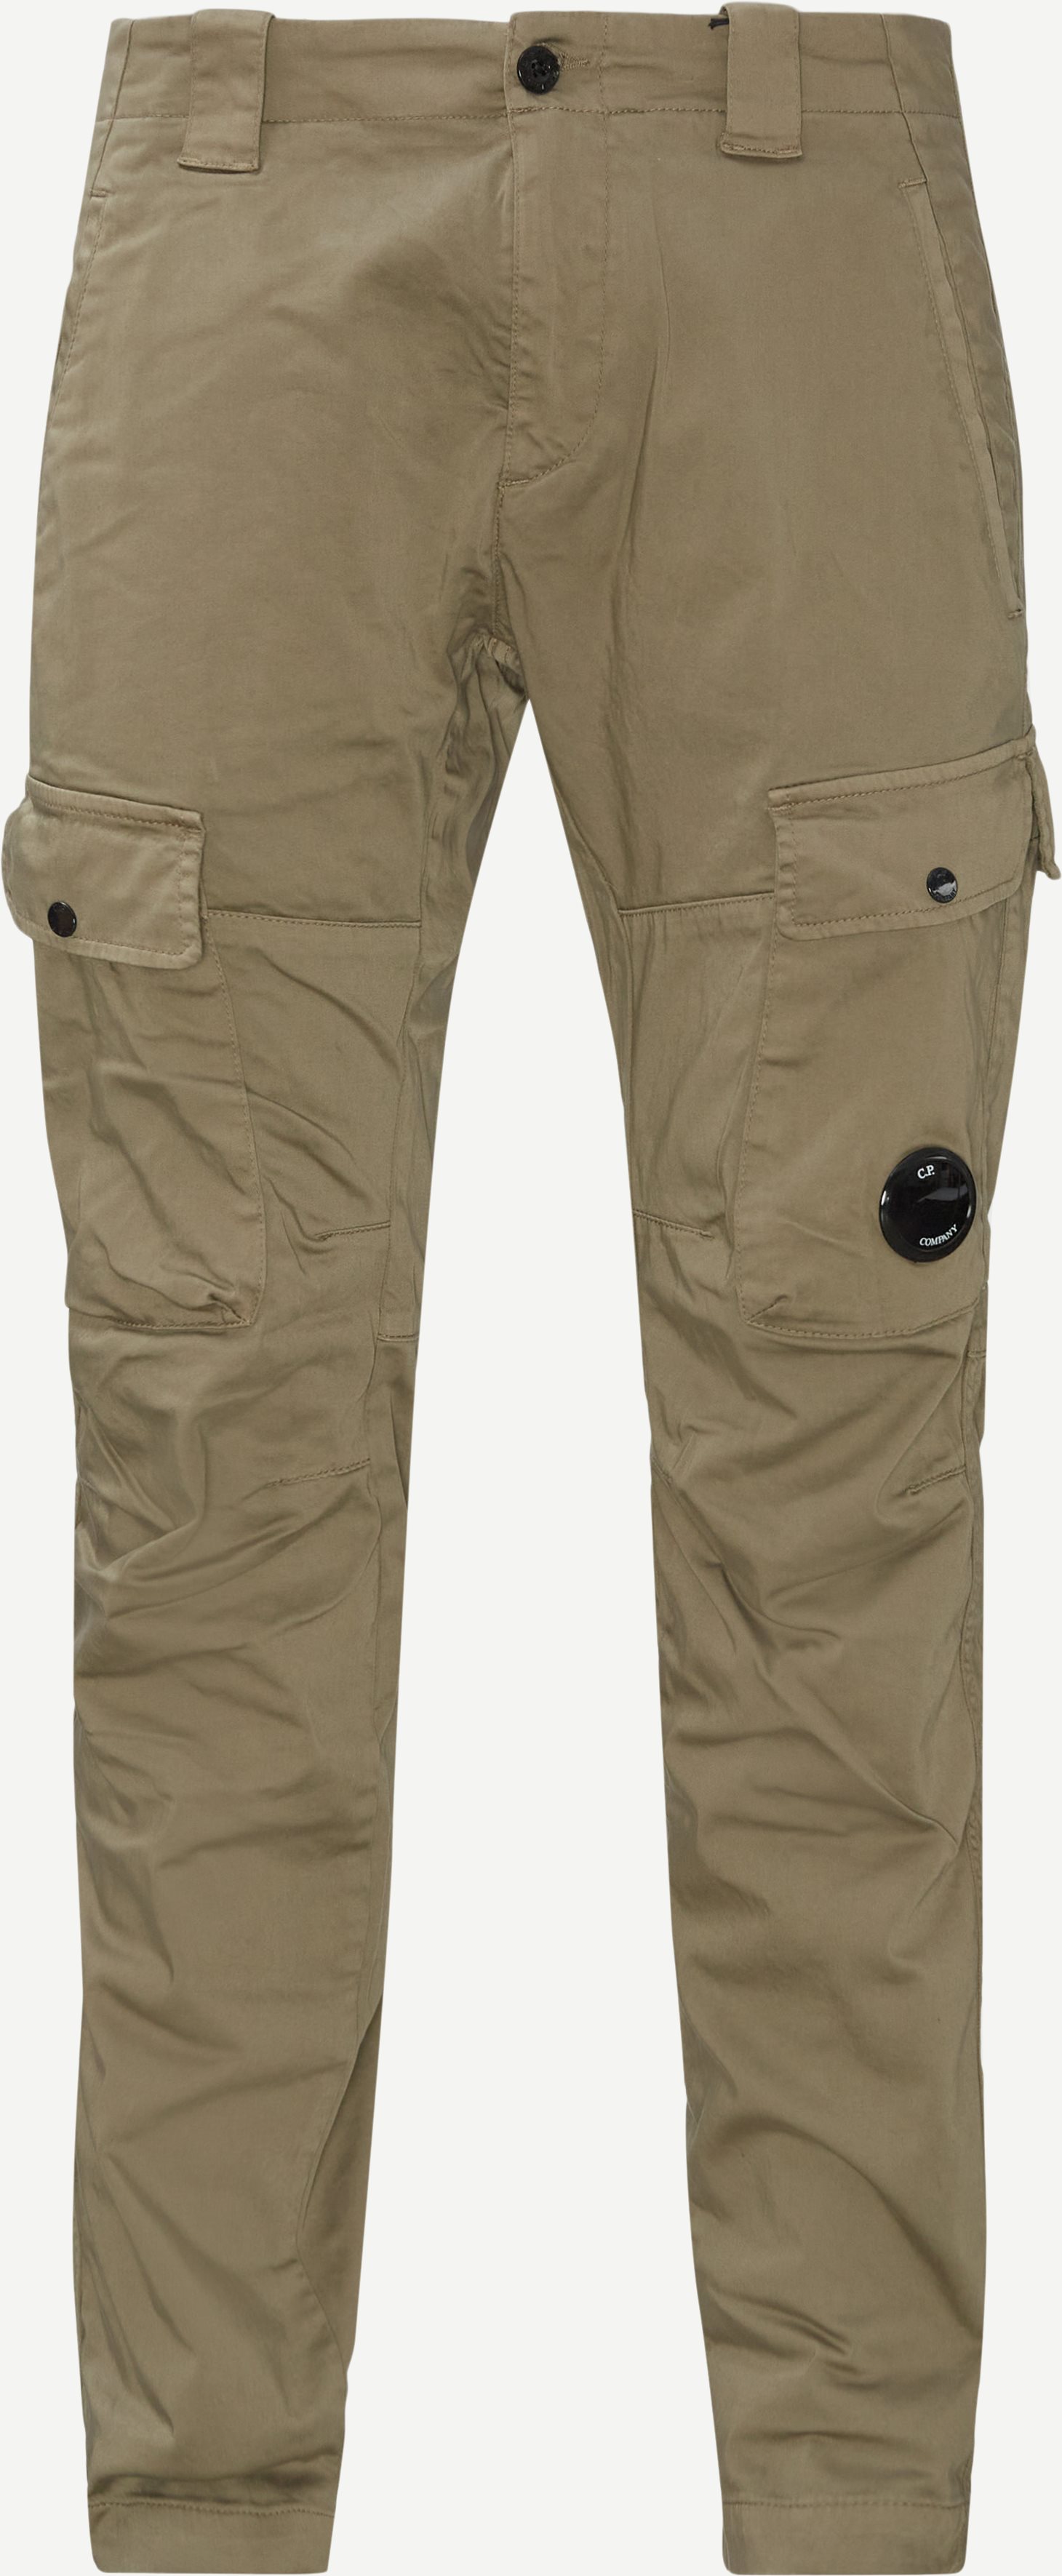 Trousers - Regular fit - Sand